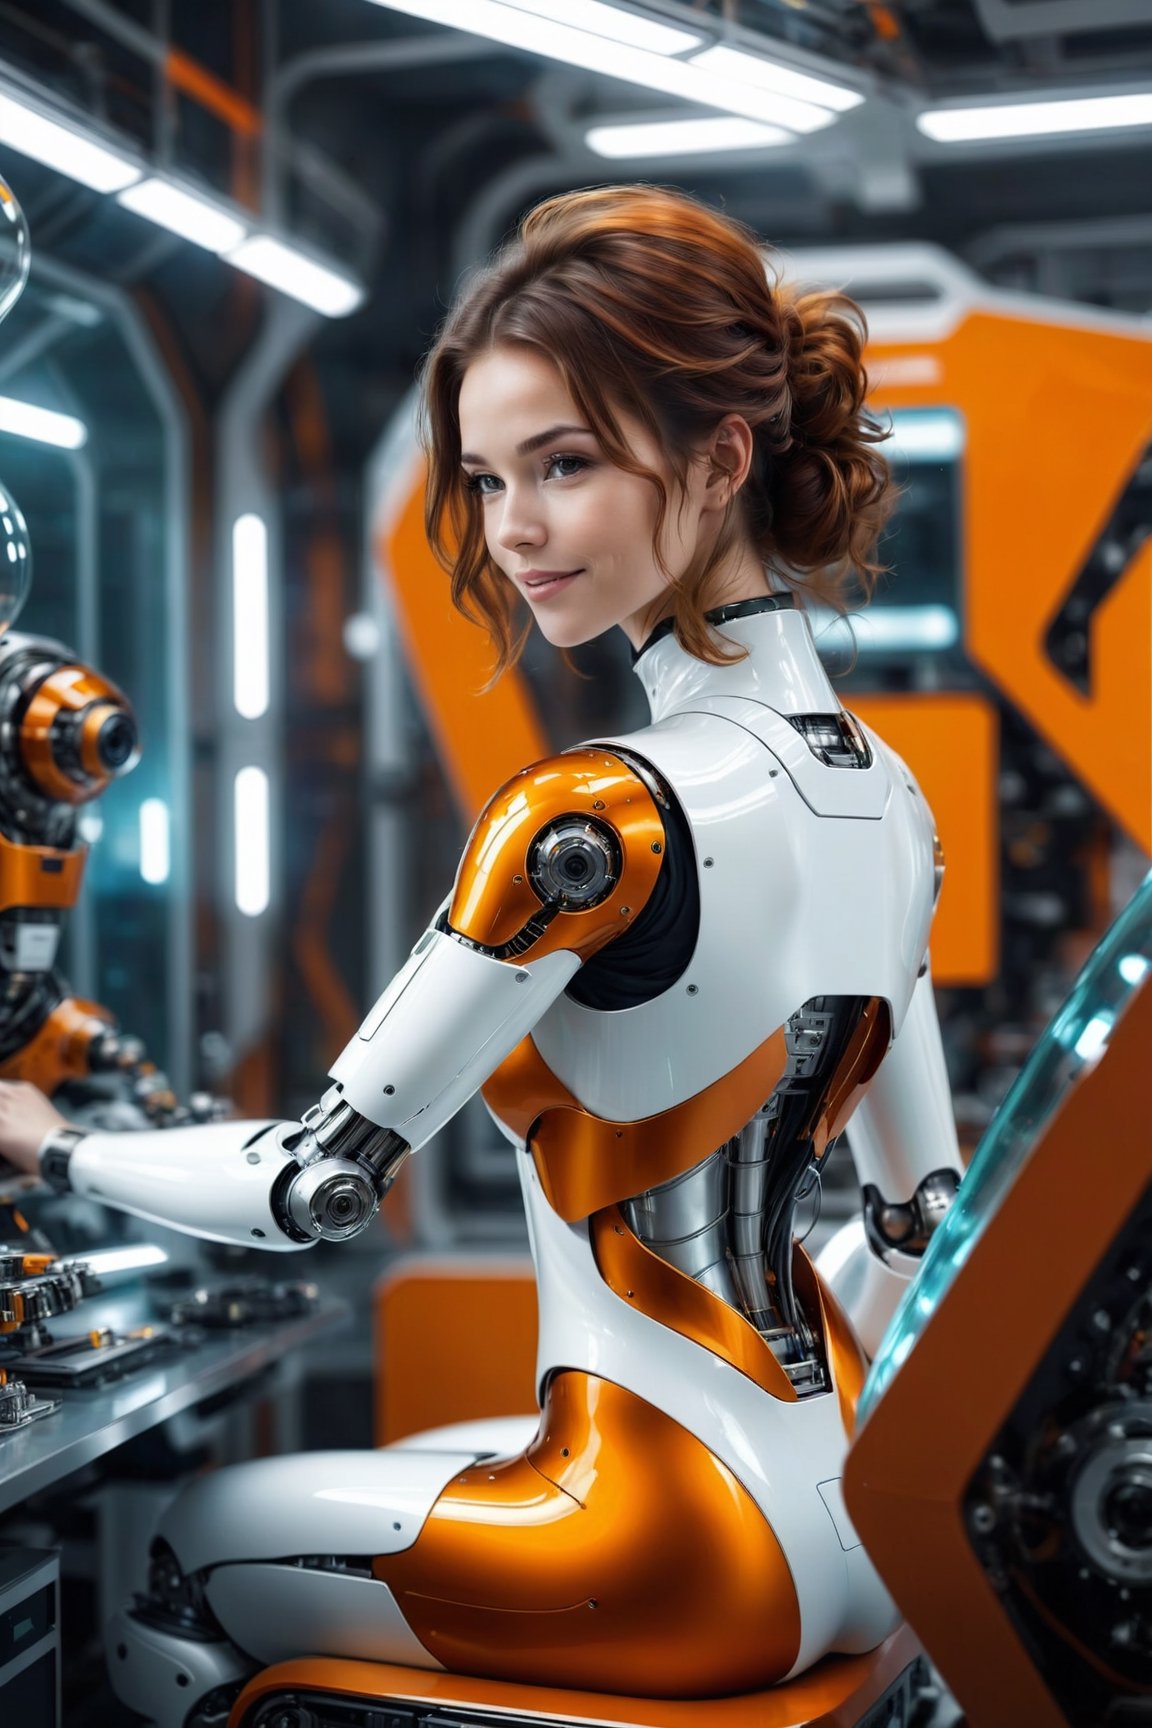 Generating ultra-realistic images of female robots. spcrft,smile,brown hair,(transparent part),chrometech,((back view: 1.5)),((orange and white metal set)),((glass element)),
sitting in mechanical repair room of the spaceship,one hand with a futuristic power tool,futuristic minimalist interior design,